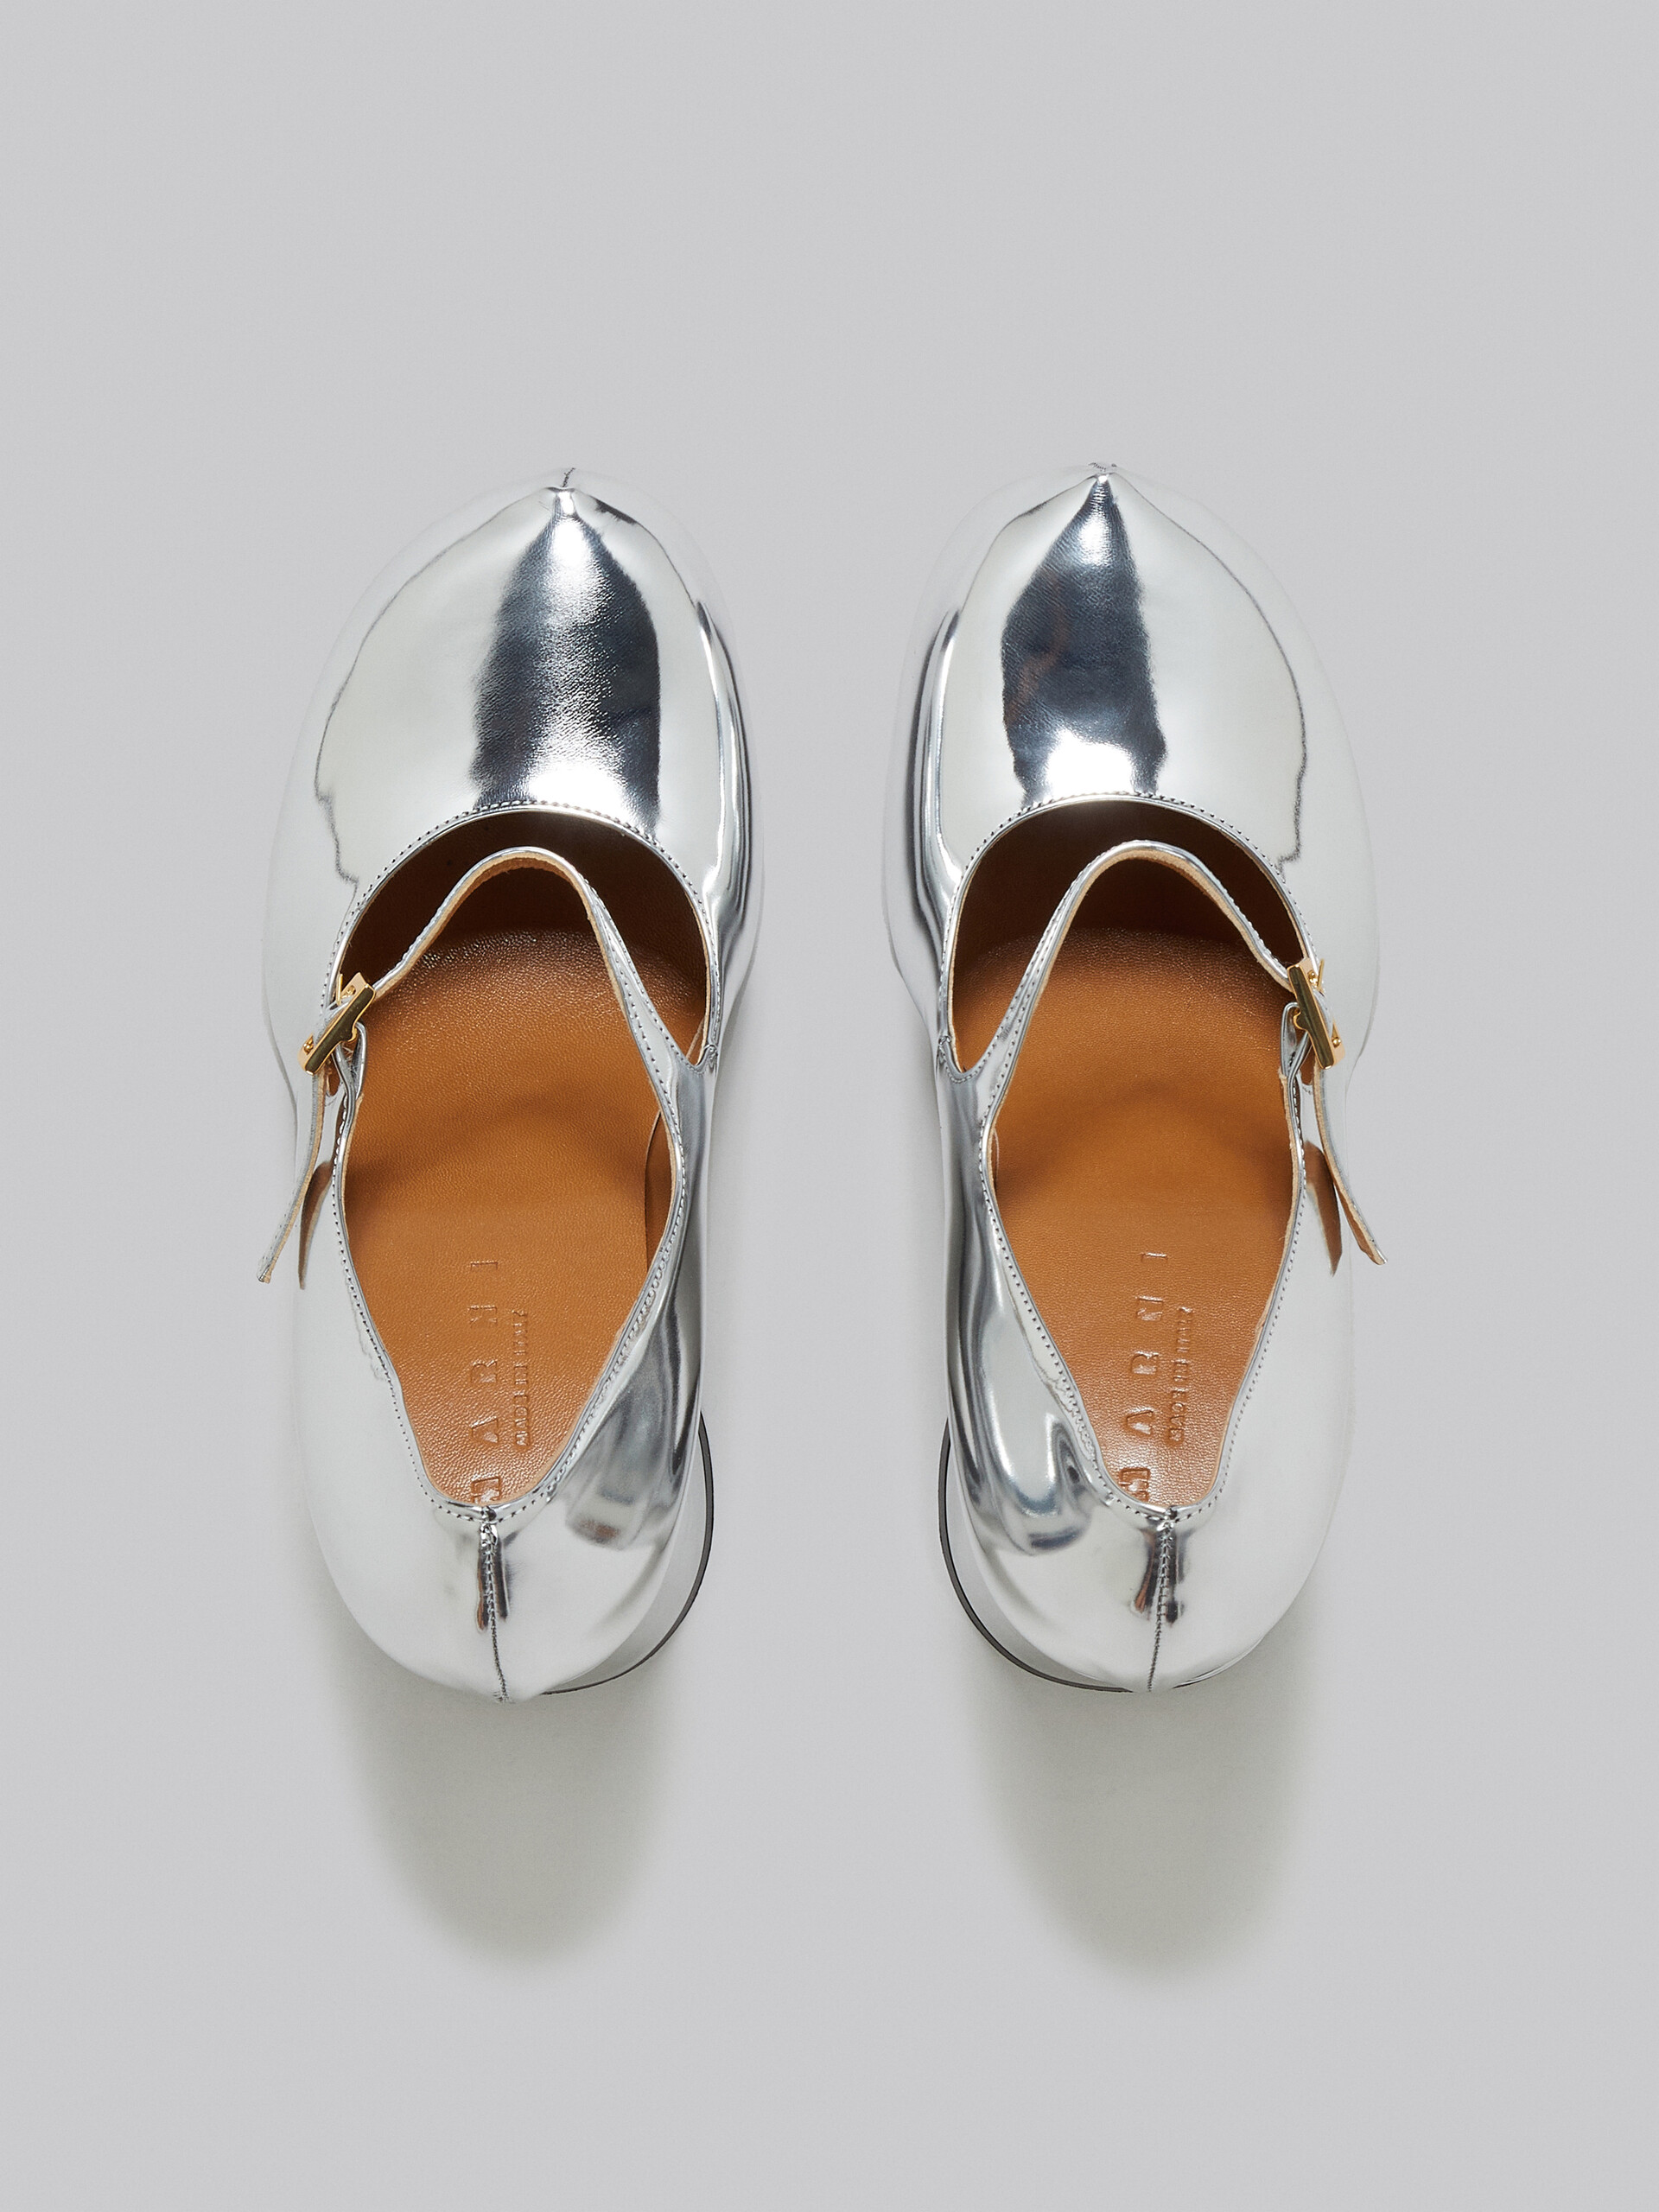 Silver mirrored leather Mary Janes - Sneakers - Image 4